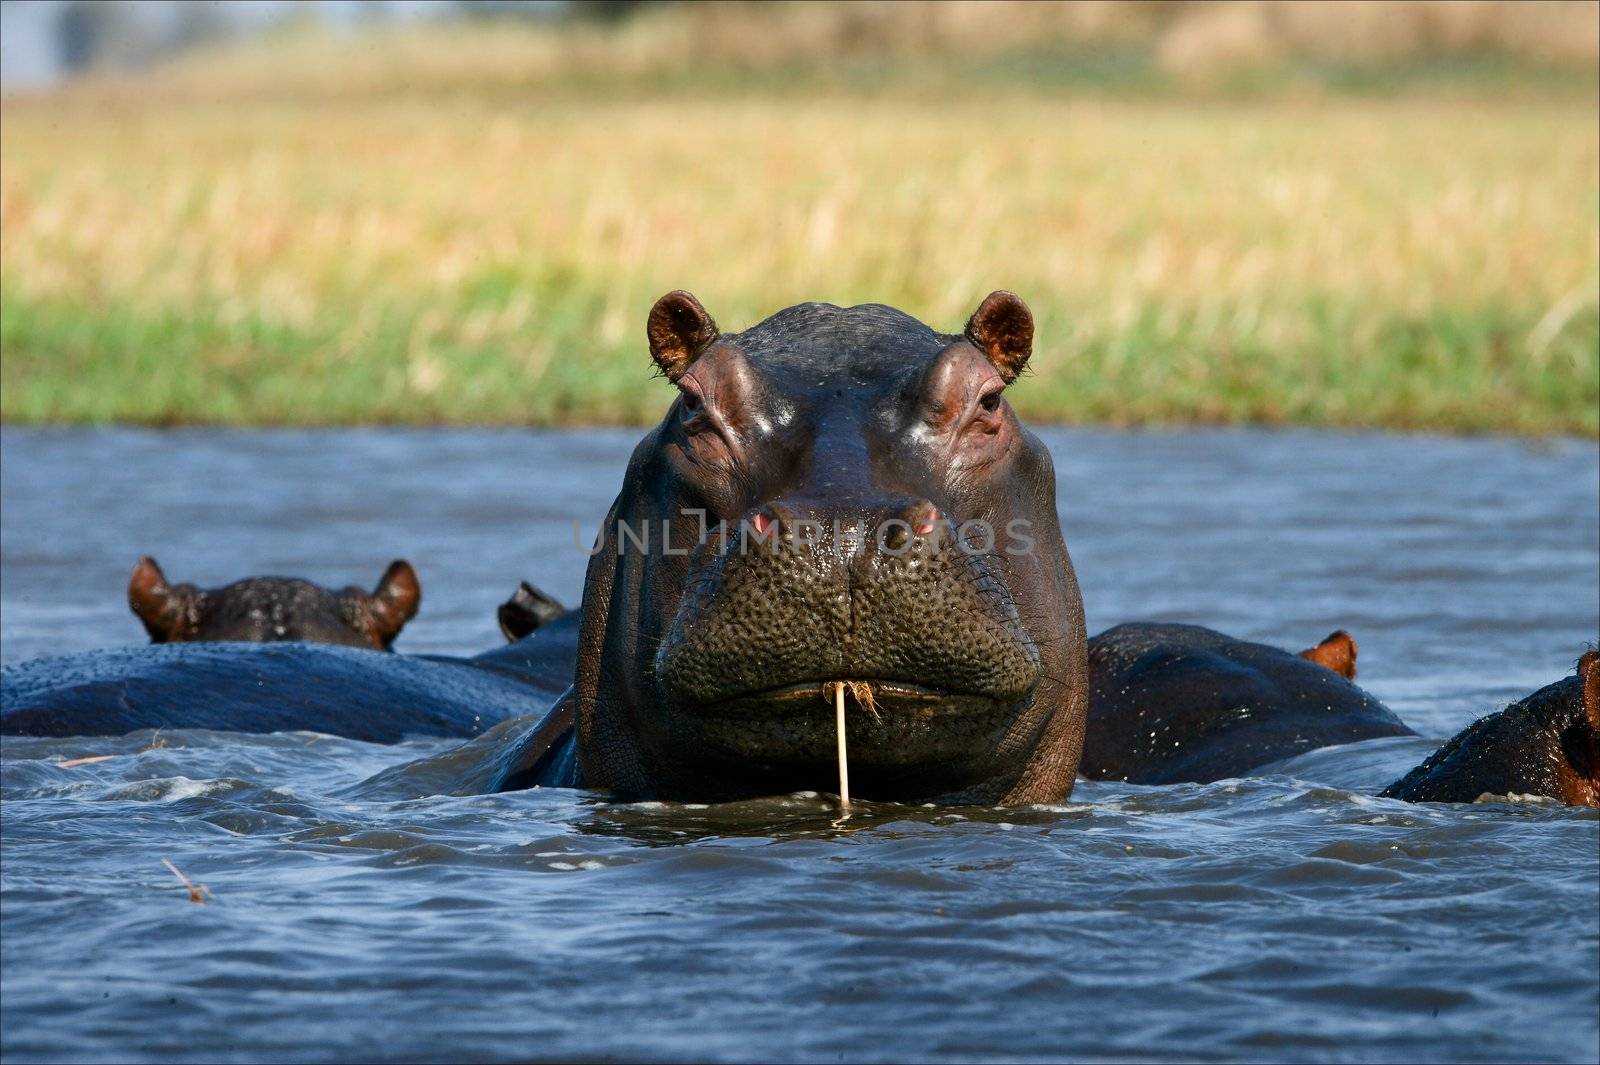 Coctail through a straw. / The hippopotamus sits in a bog and as though drinks water through a straw. Zambia. Africa.